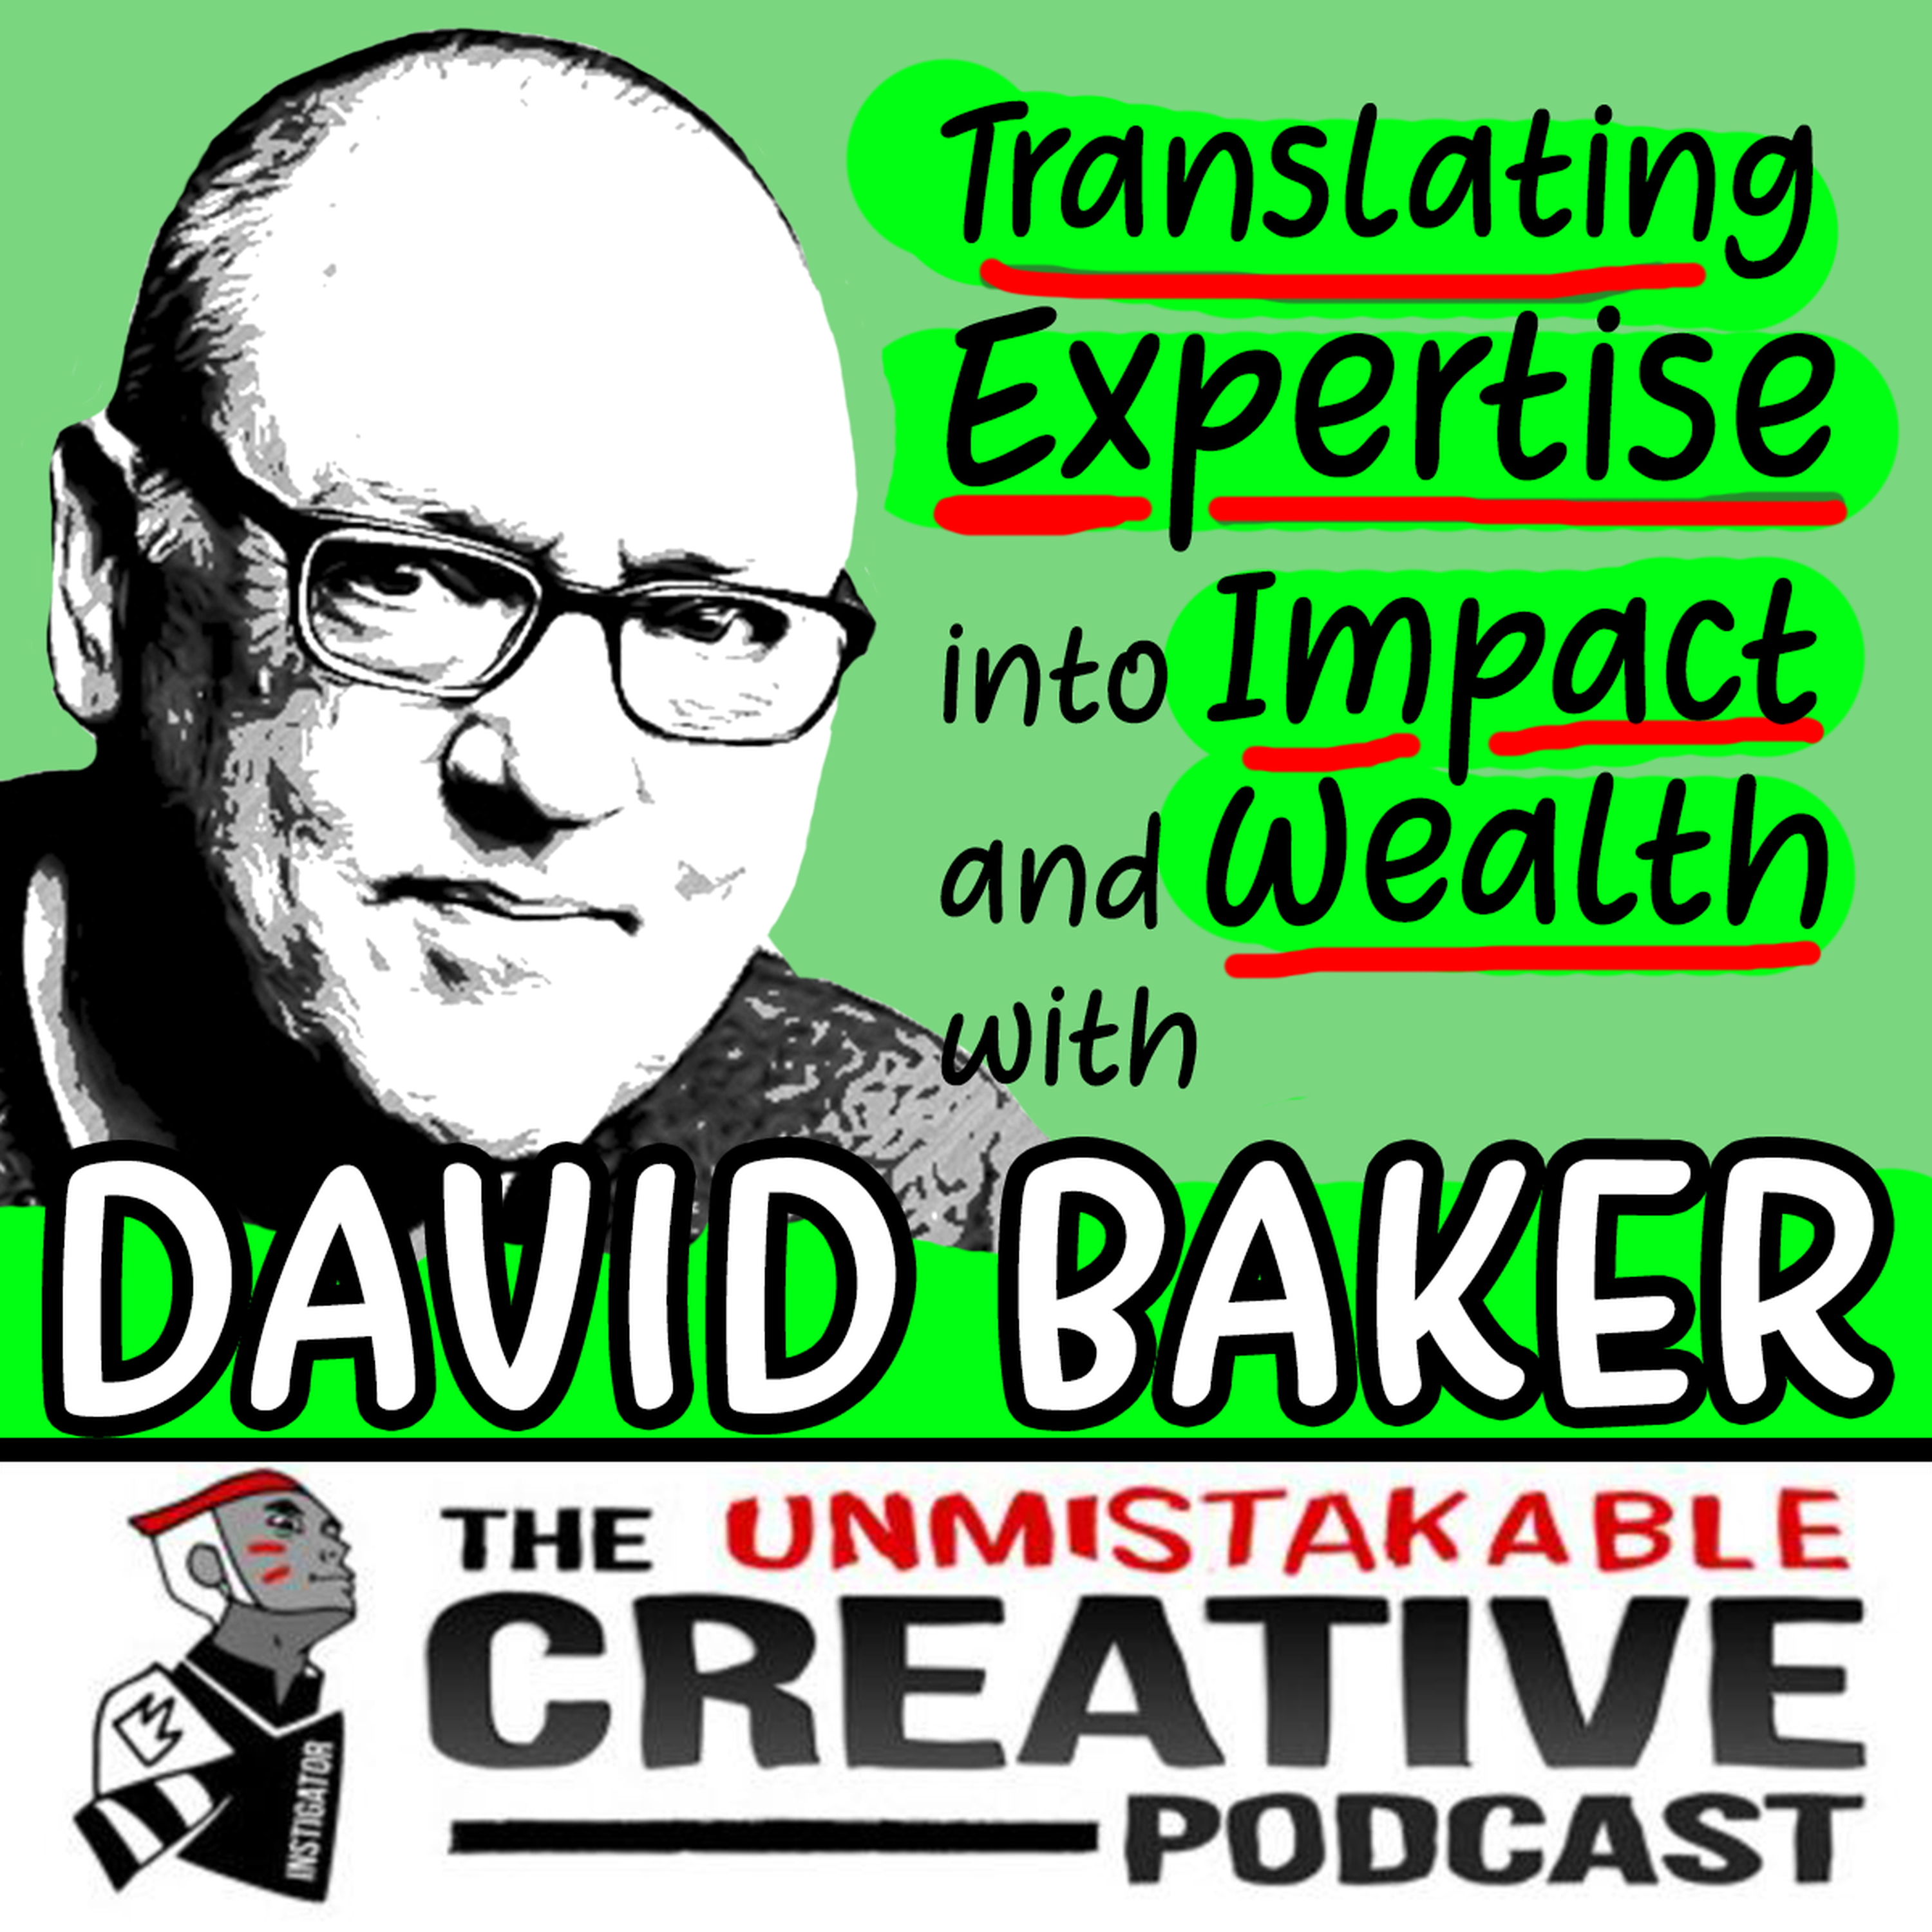 Translating Expertise into Impact and Wealth with David Baker